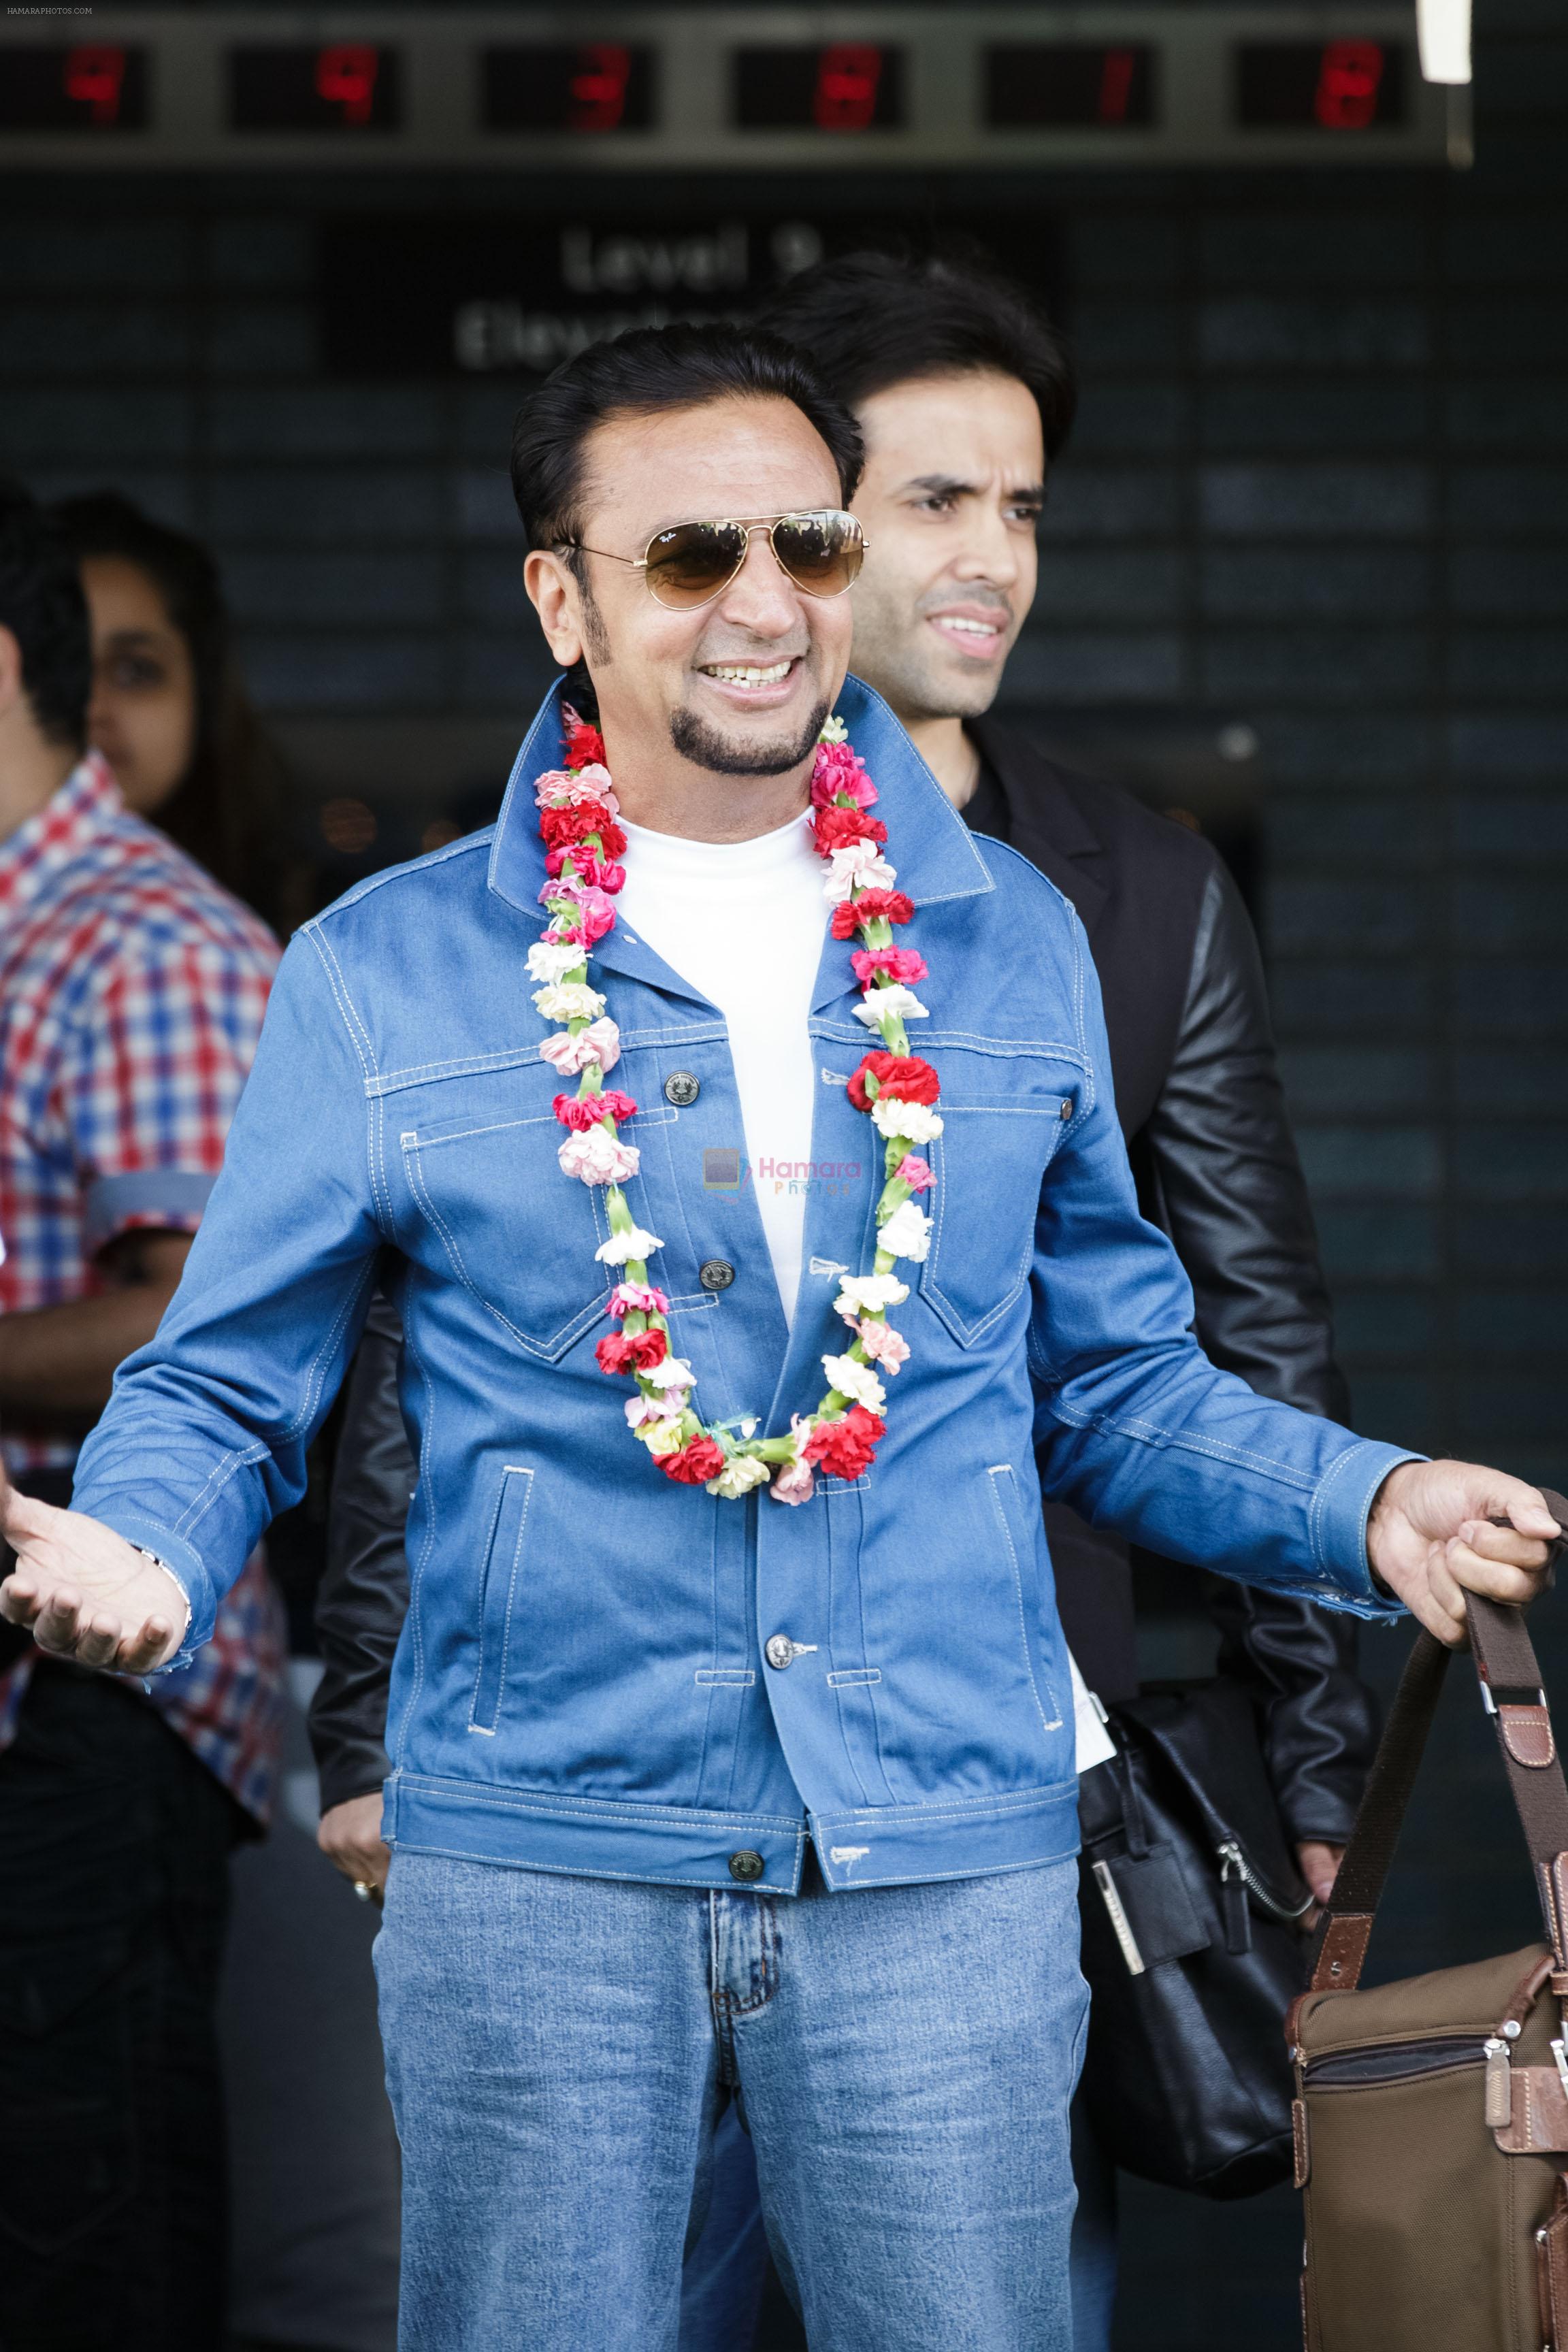 Gulshan Grover arrives at Tampa International Airpot on 24th April 2014 for IIFA